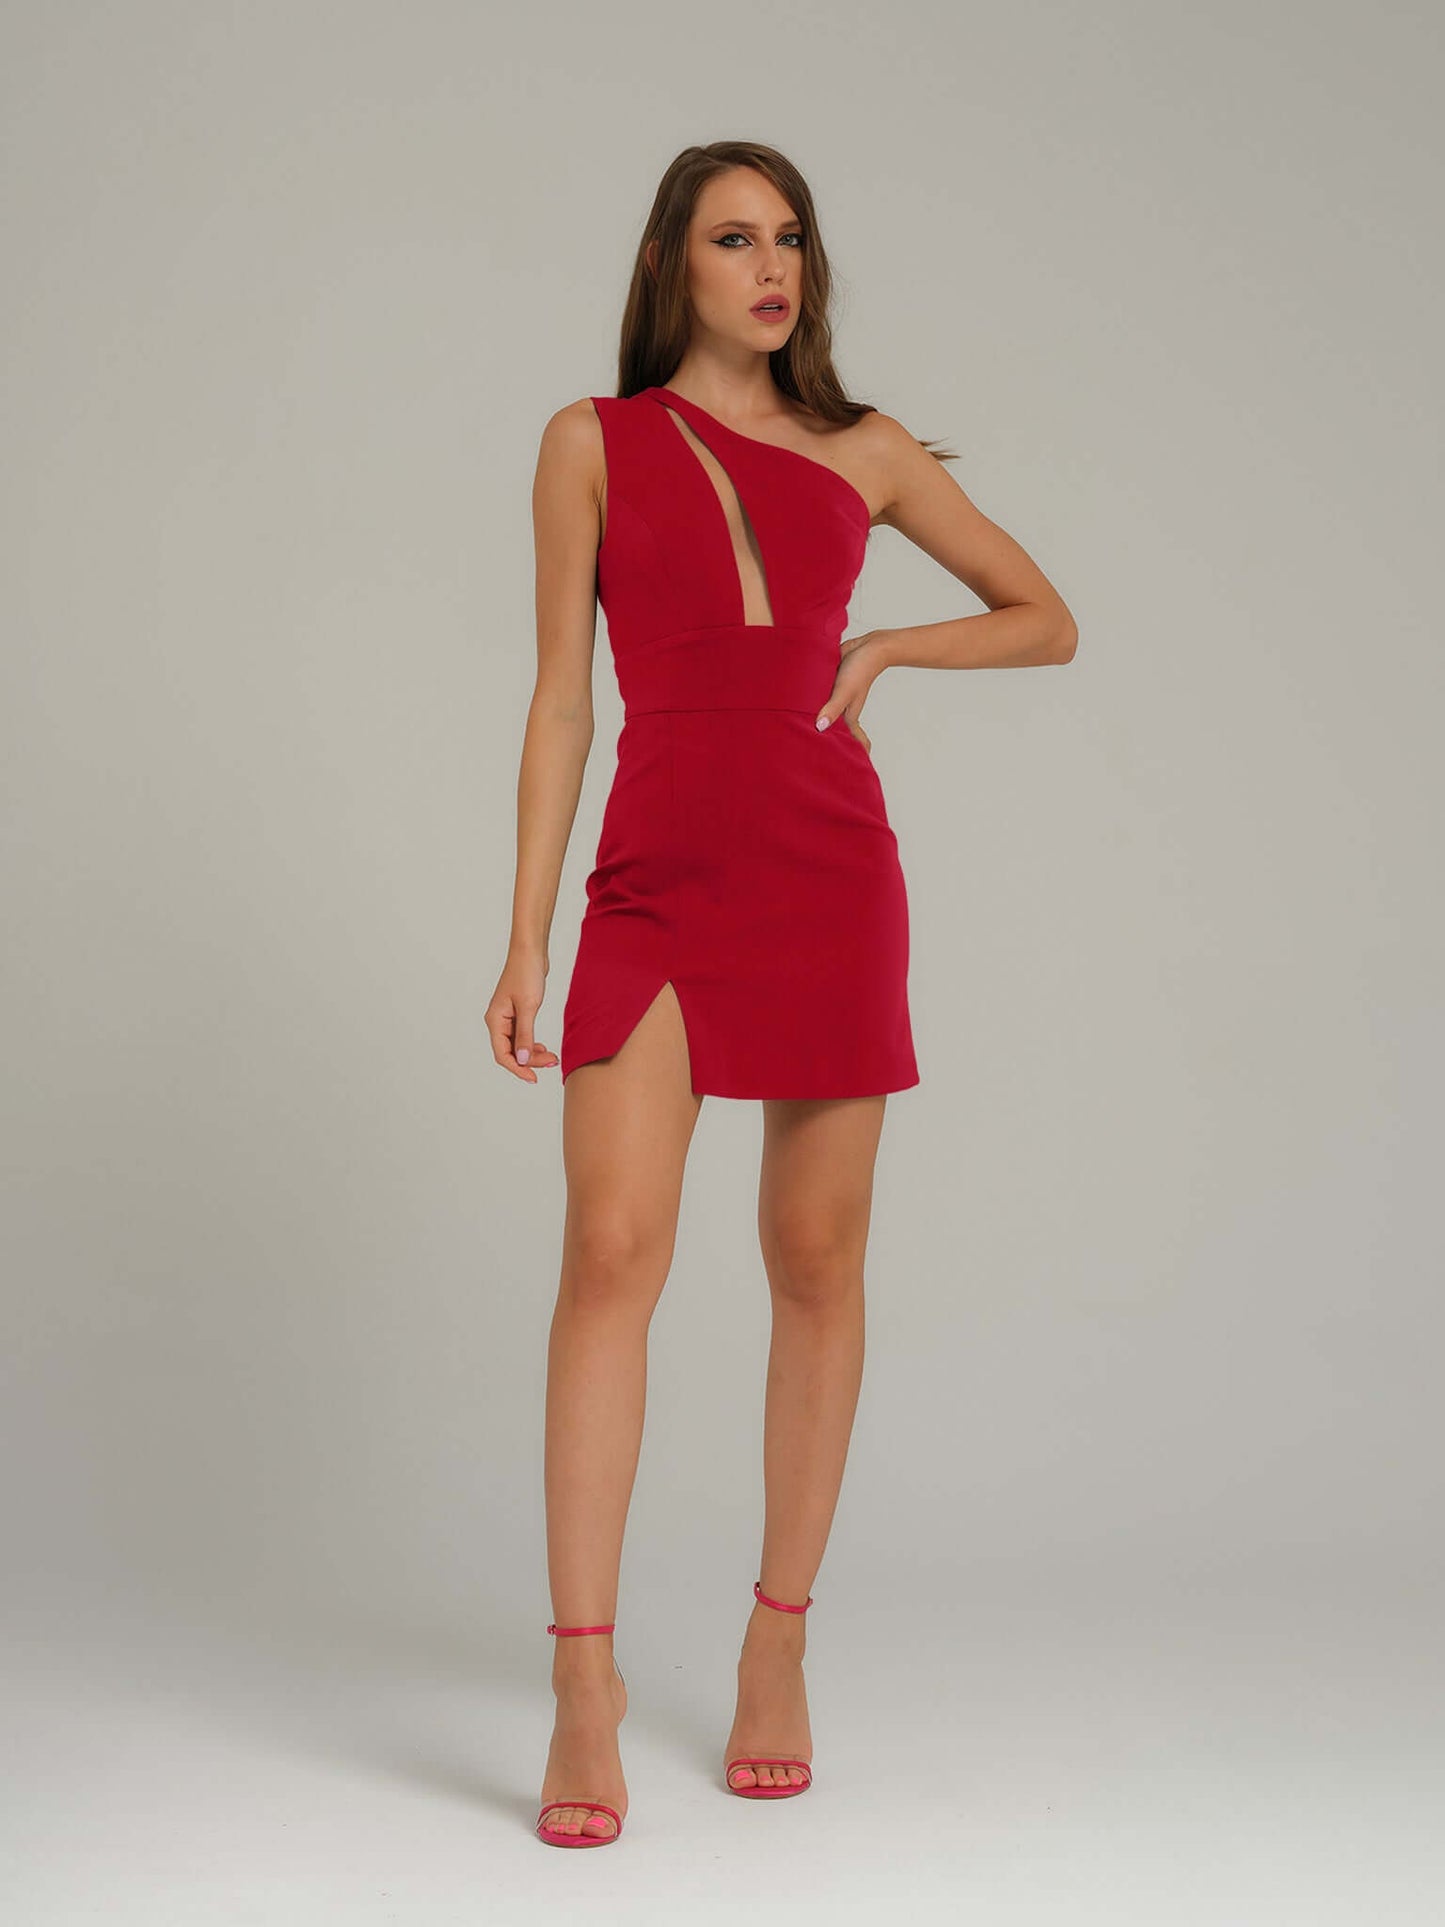 Tia Dorraine Love Weapon One-Shoulder Mini Dress - Red This mini dress showcases the sophisticated style and modern allure of Tia Dorraine. Its confidently feminine figure-hugging silhouette pairs with an asymmetrical neckline and cut-out bodice details f